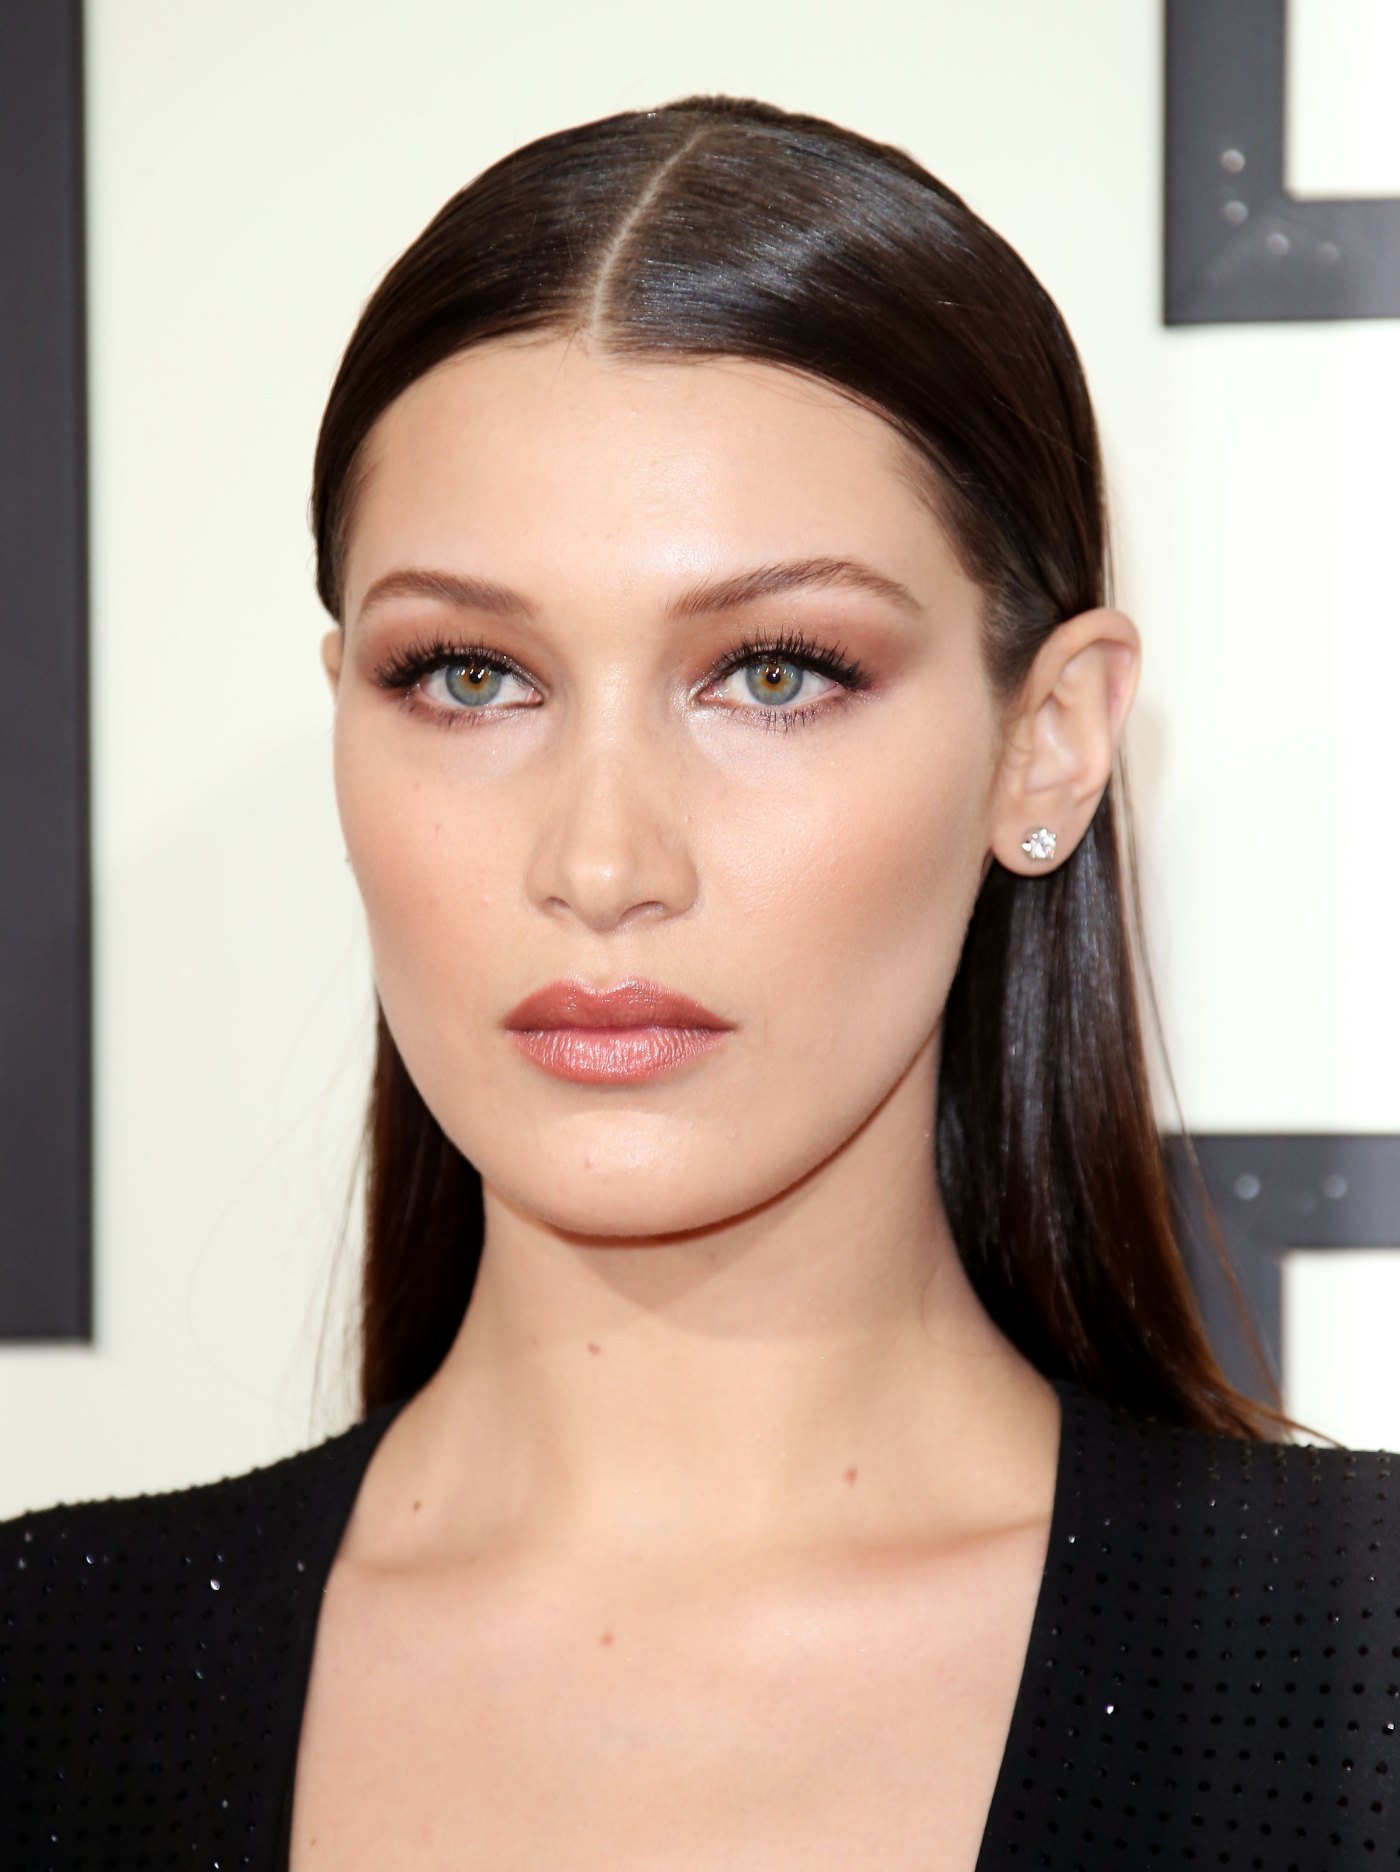 Grammys Red Carpet Makeup, Hair, Style Tips Secrets and Hacks